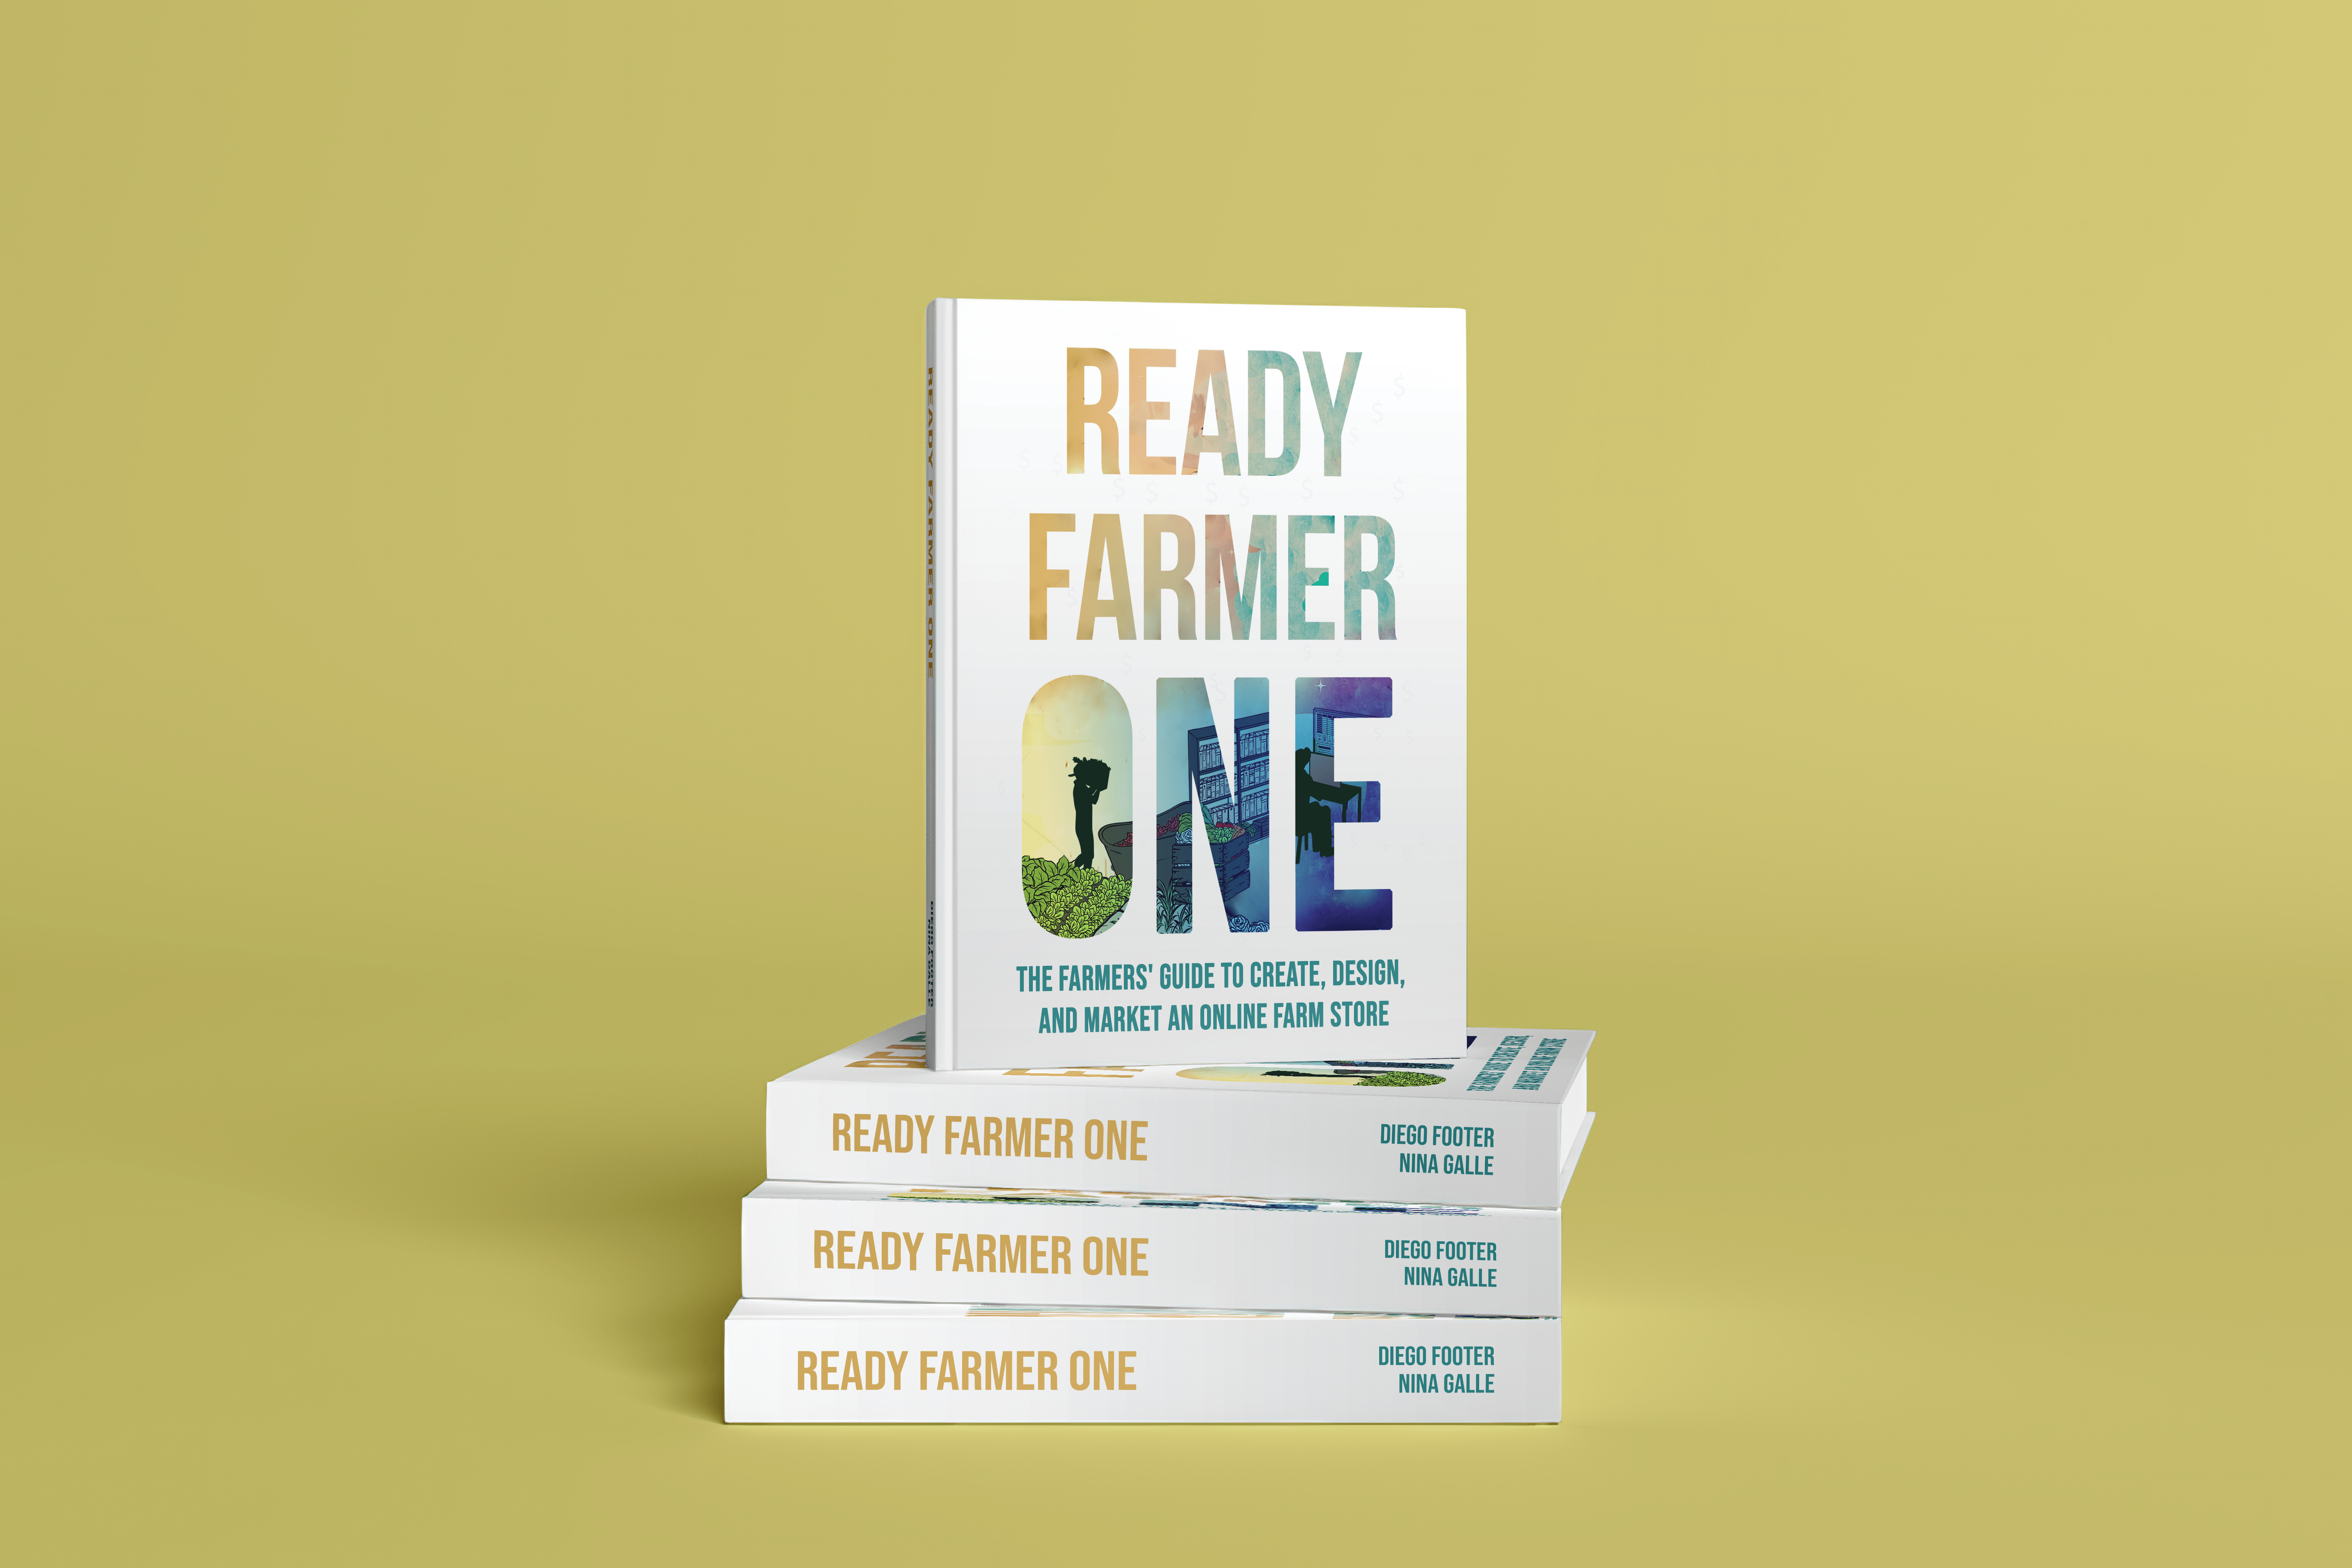 The Best Farming Book You'll Read This Year Isn't About Farming.